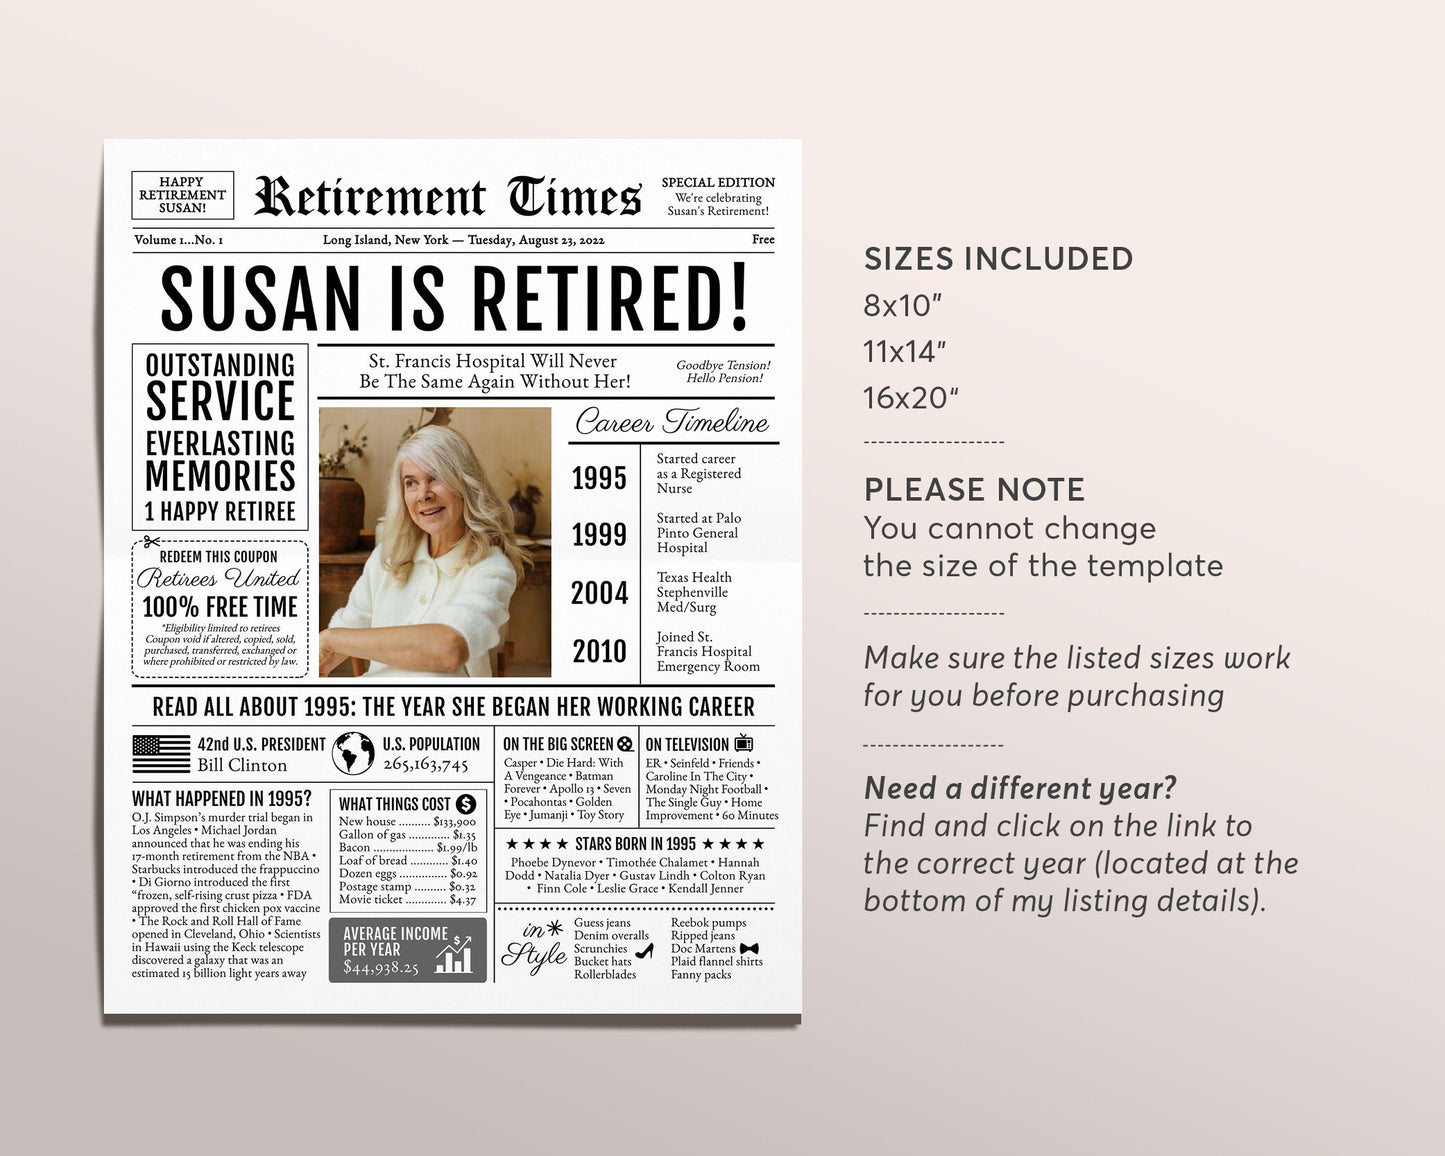 Editable Retirement Celebration Sign, Unique Newspaper Retirement Gifts for Men Women, Vice Assistant Principal Gift, History Back in 1995